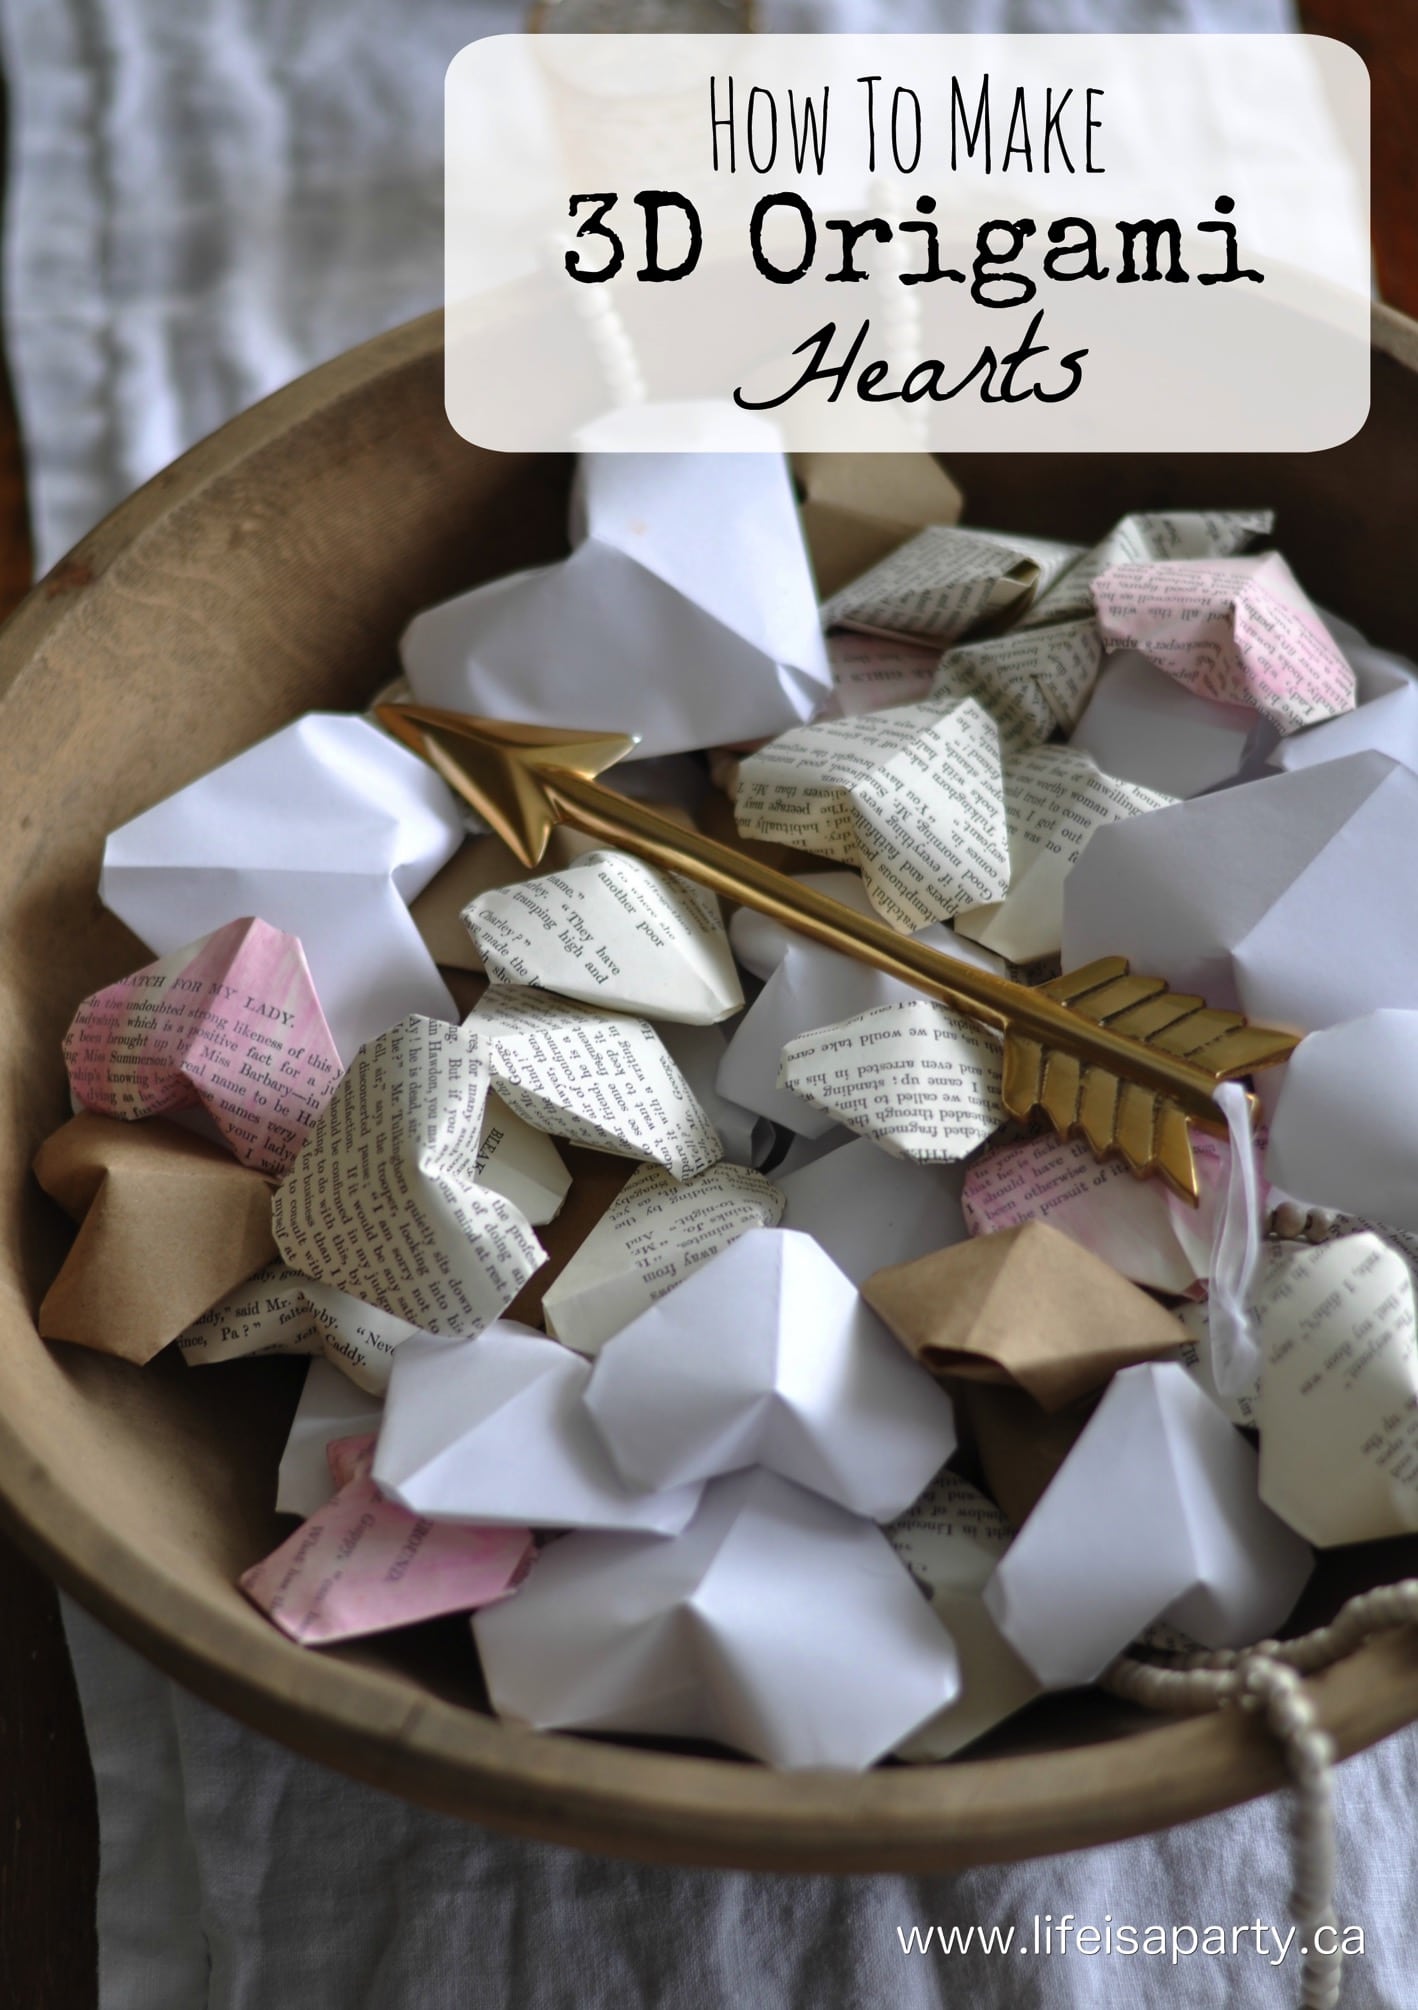 3D Origami Hearts -create your own origami hearts out of old book pages. Perfect for Valentine's Day decor, wedding decor, or a baby nursery.